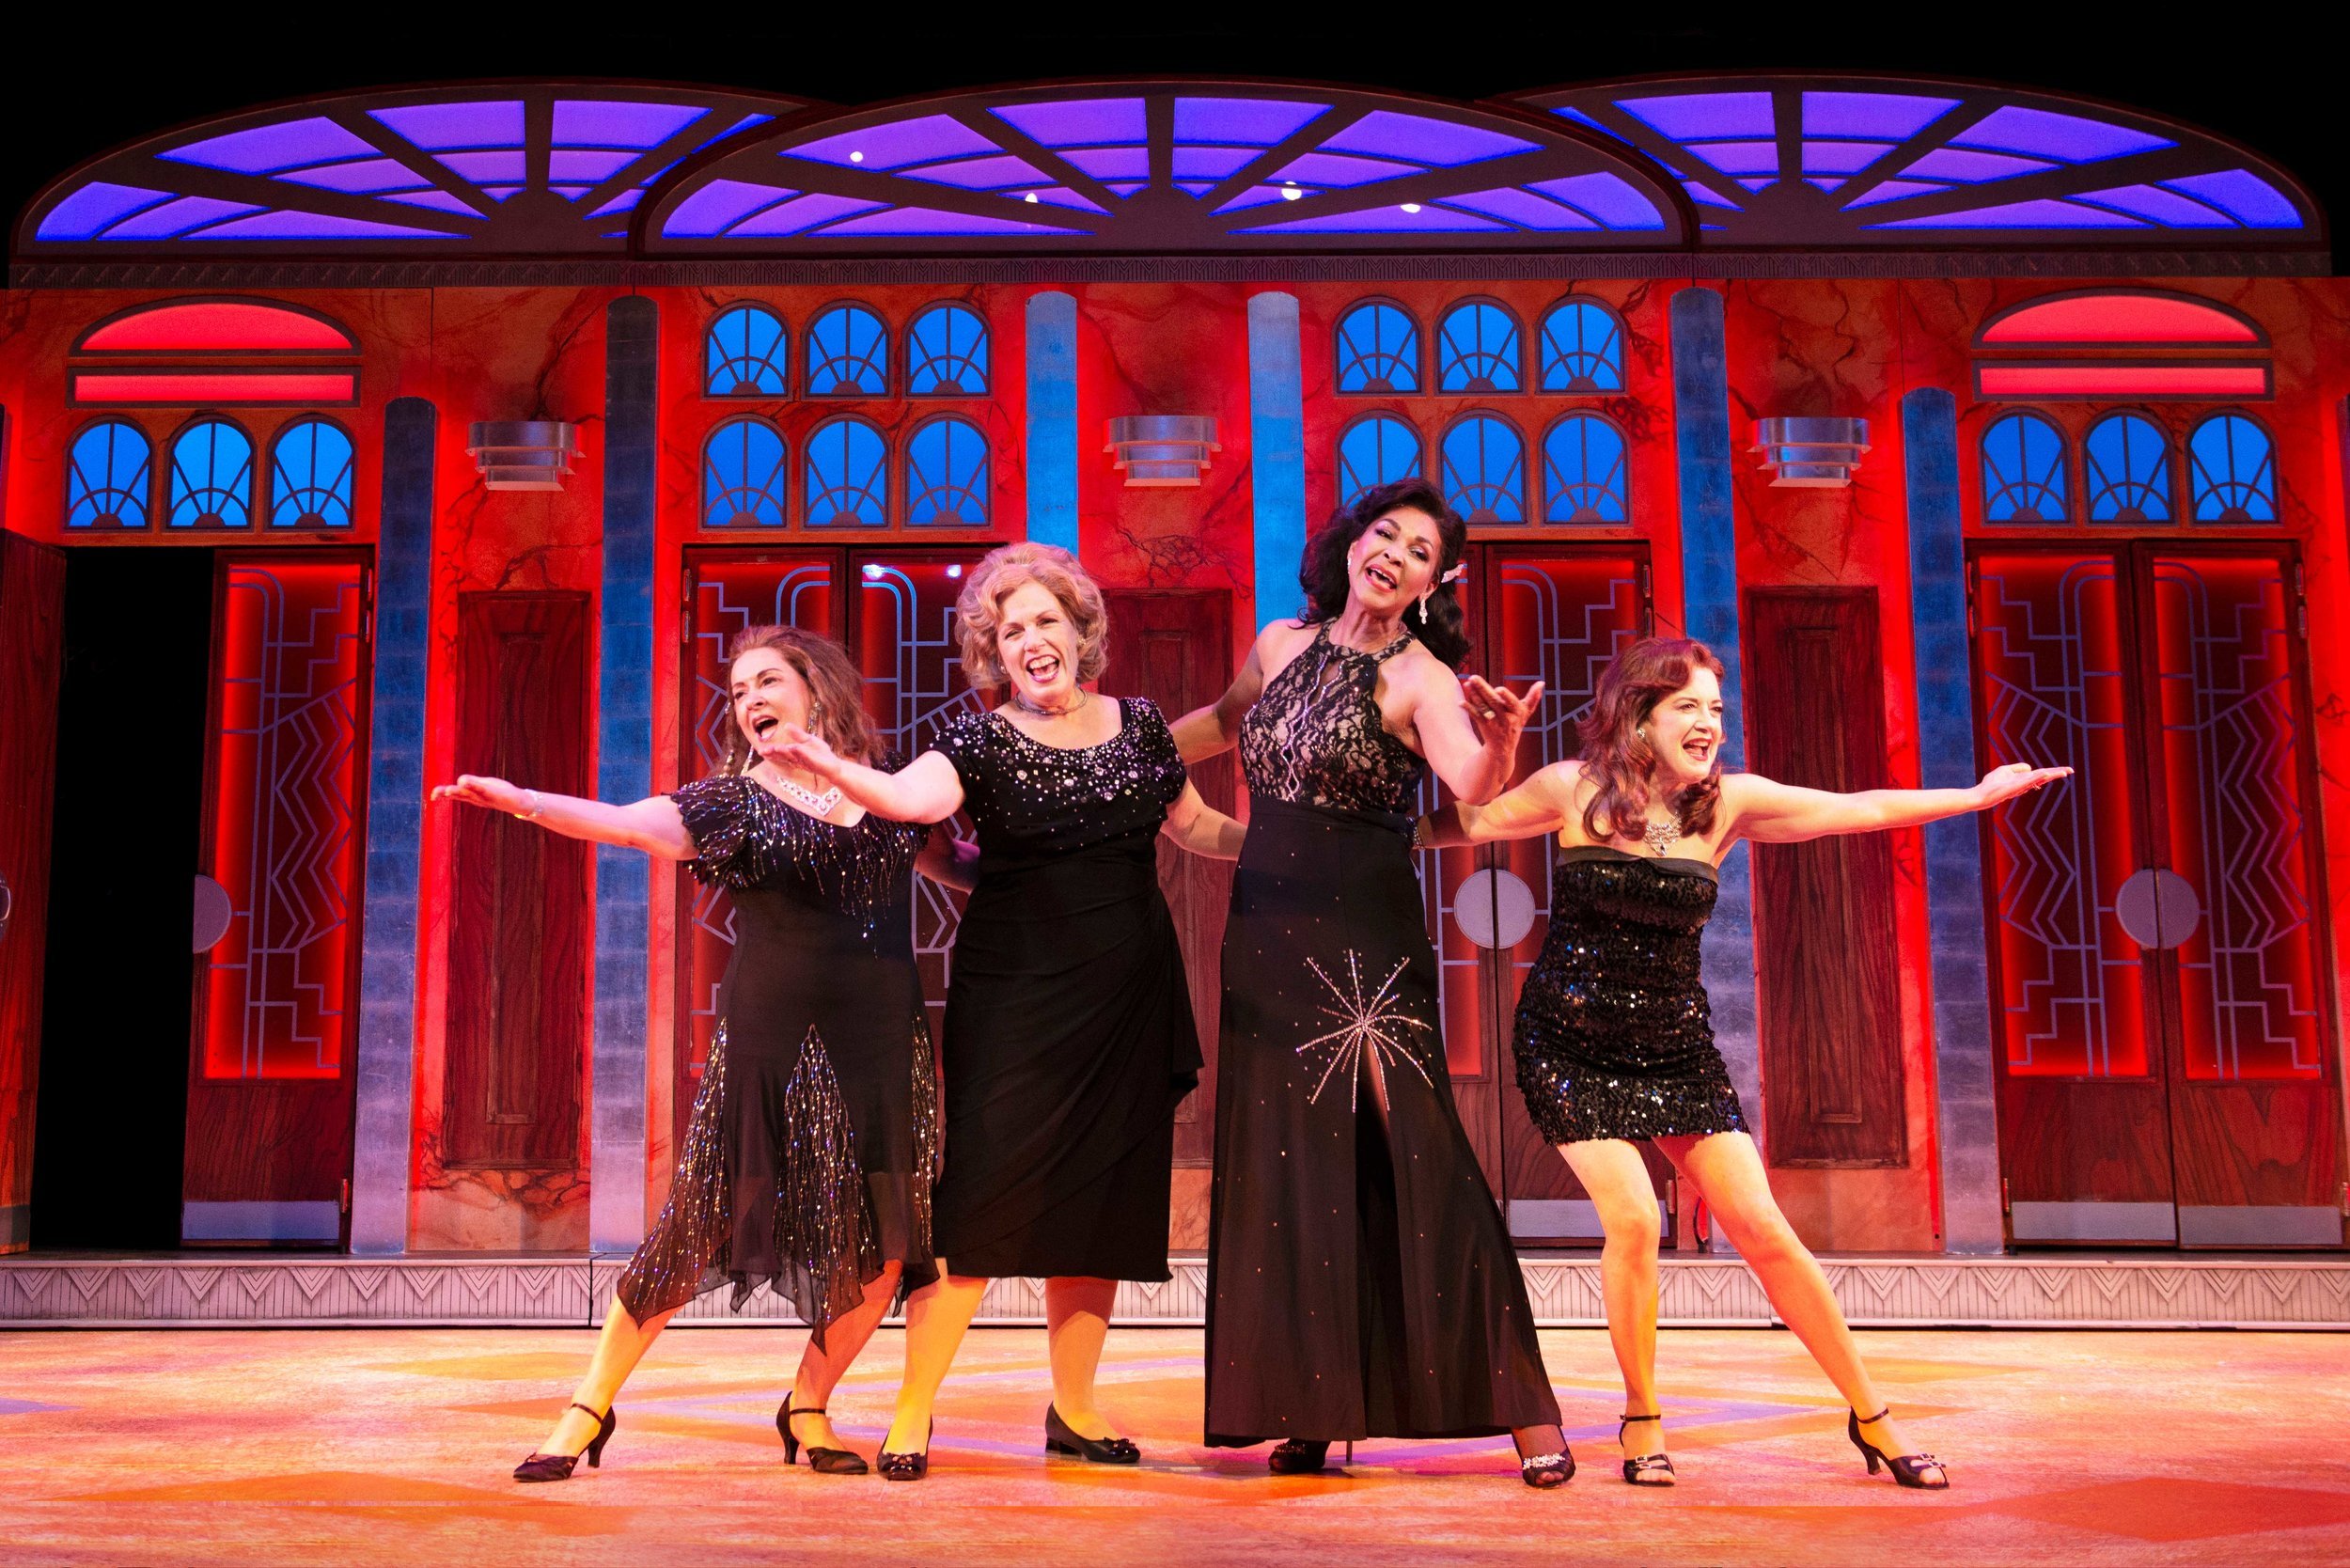  Melanie Souza, Roberta B. Wall, Anise Ritchie, and Kathy St. George in Menopause The Musical® (2019) Photo by Gary Ng 